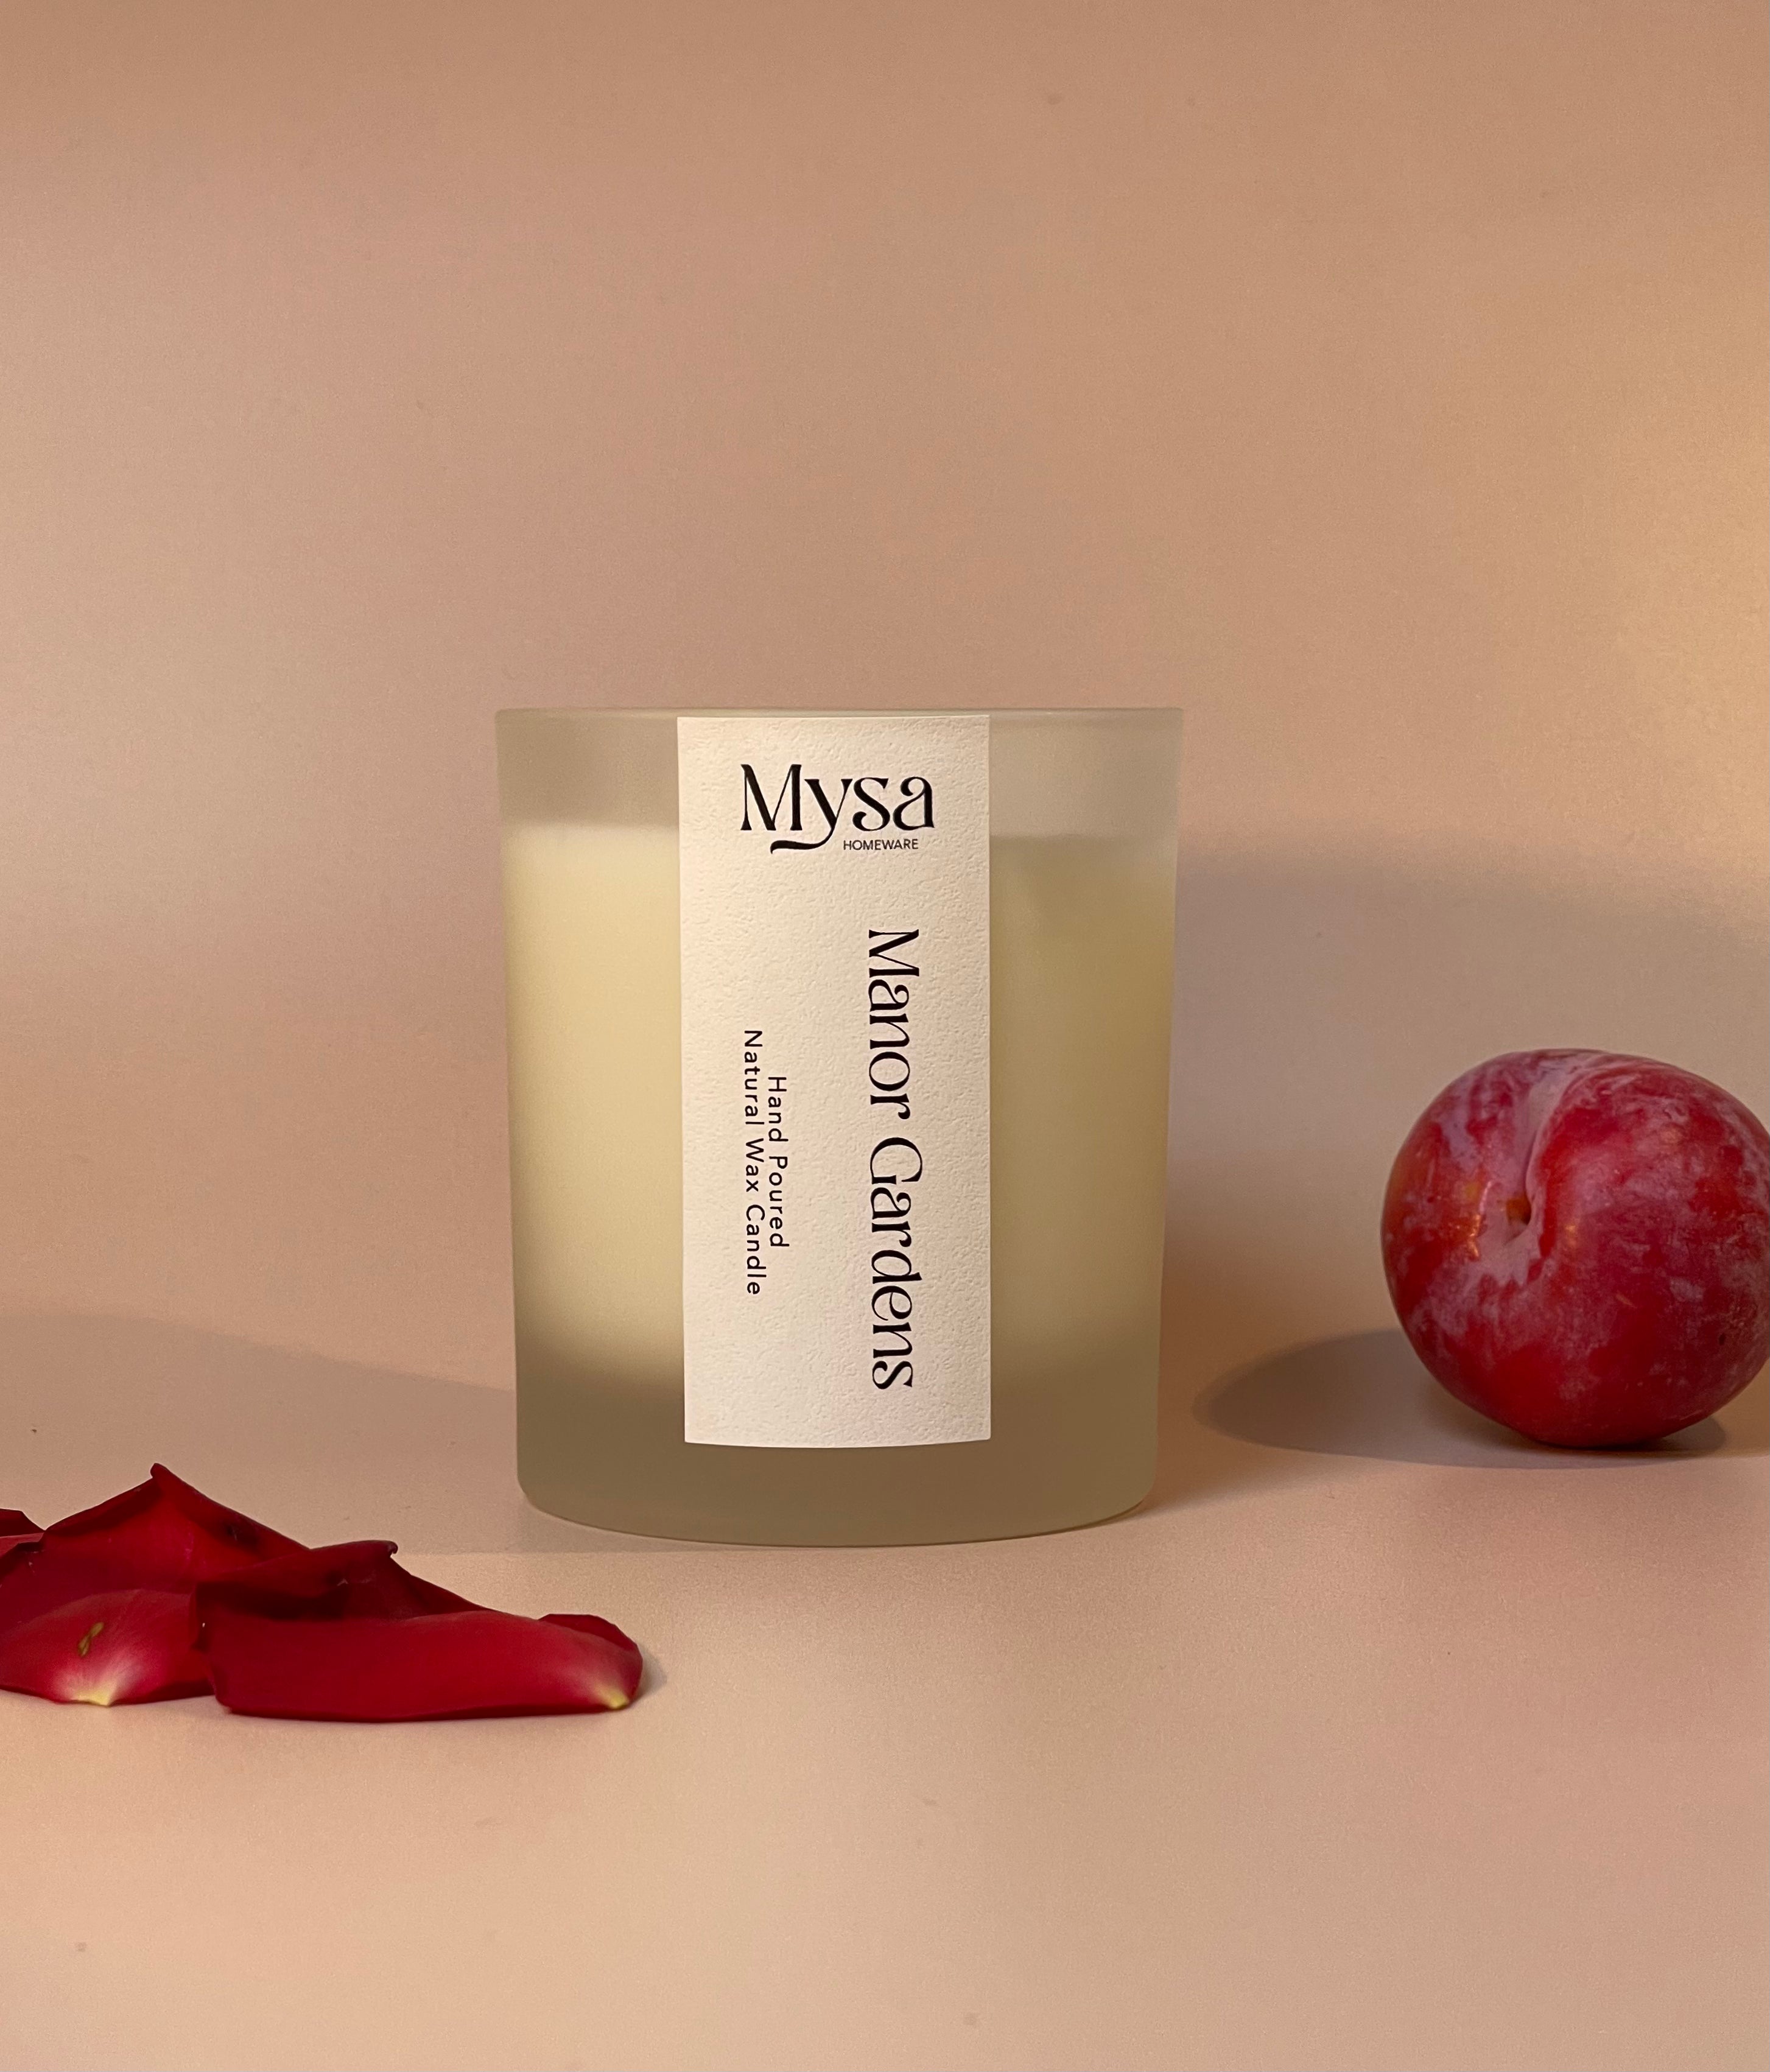 Manor Gardens luxury scented candle crafted from natural wax, featuring a delightful blend of damson plum, rose, and patchouli fragrance.